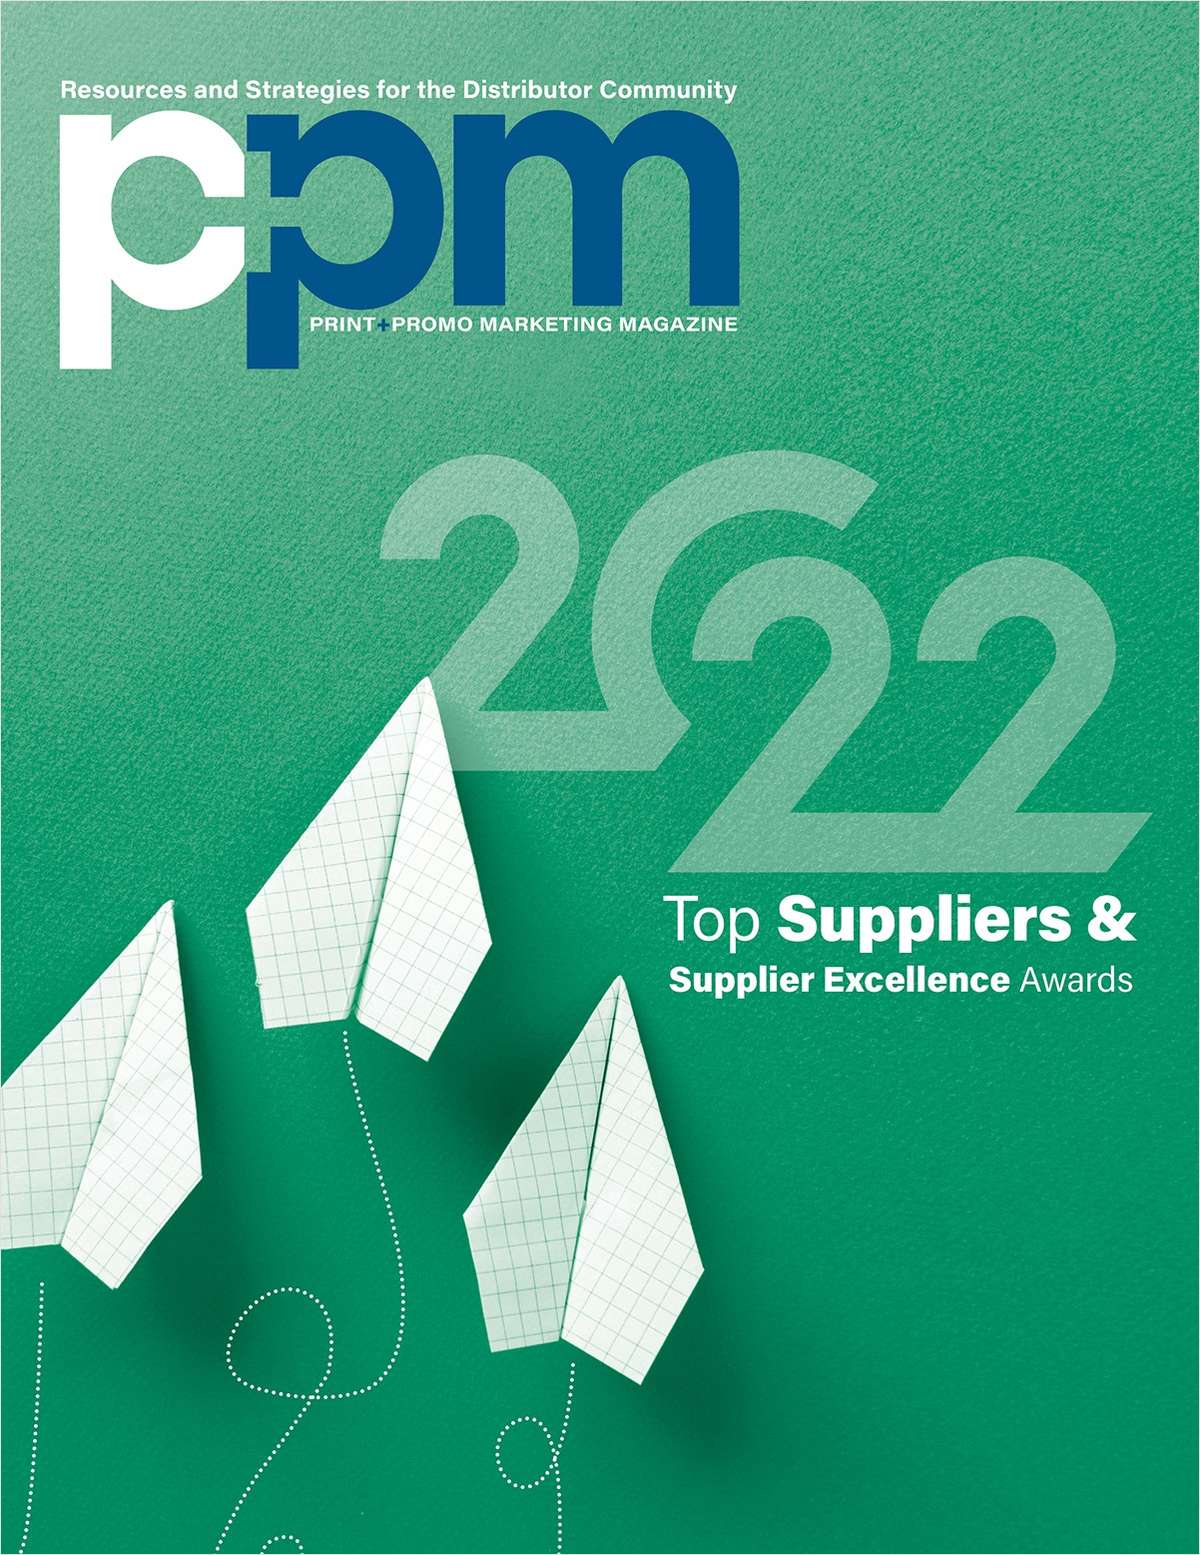 The Print+Promo Marketing 2022 Top Suppliers List